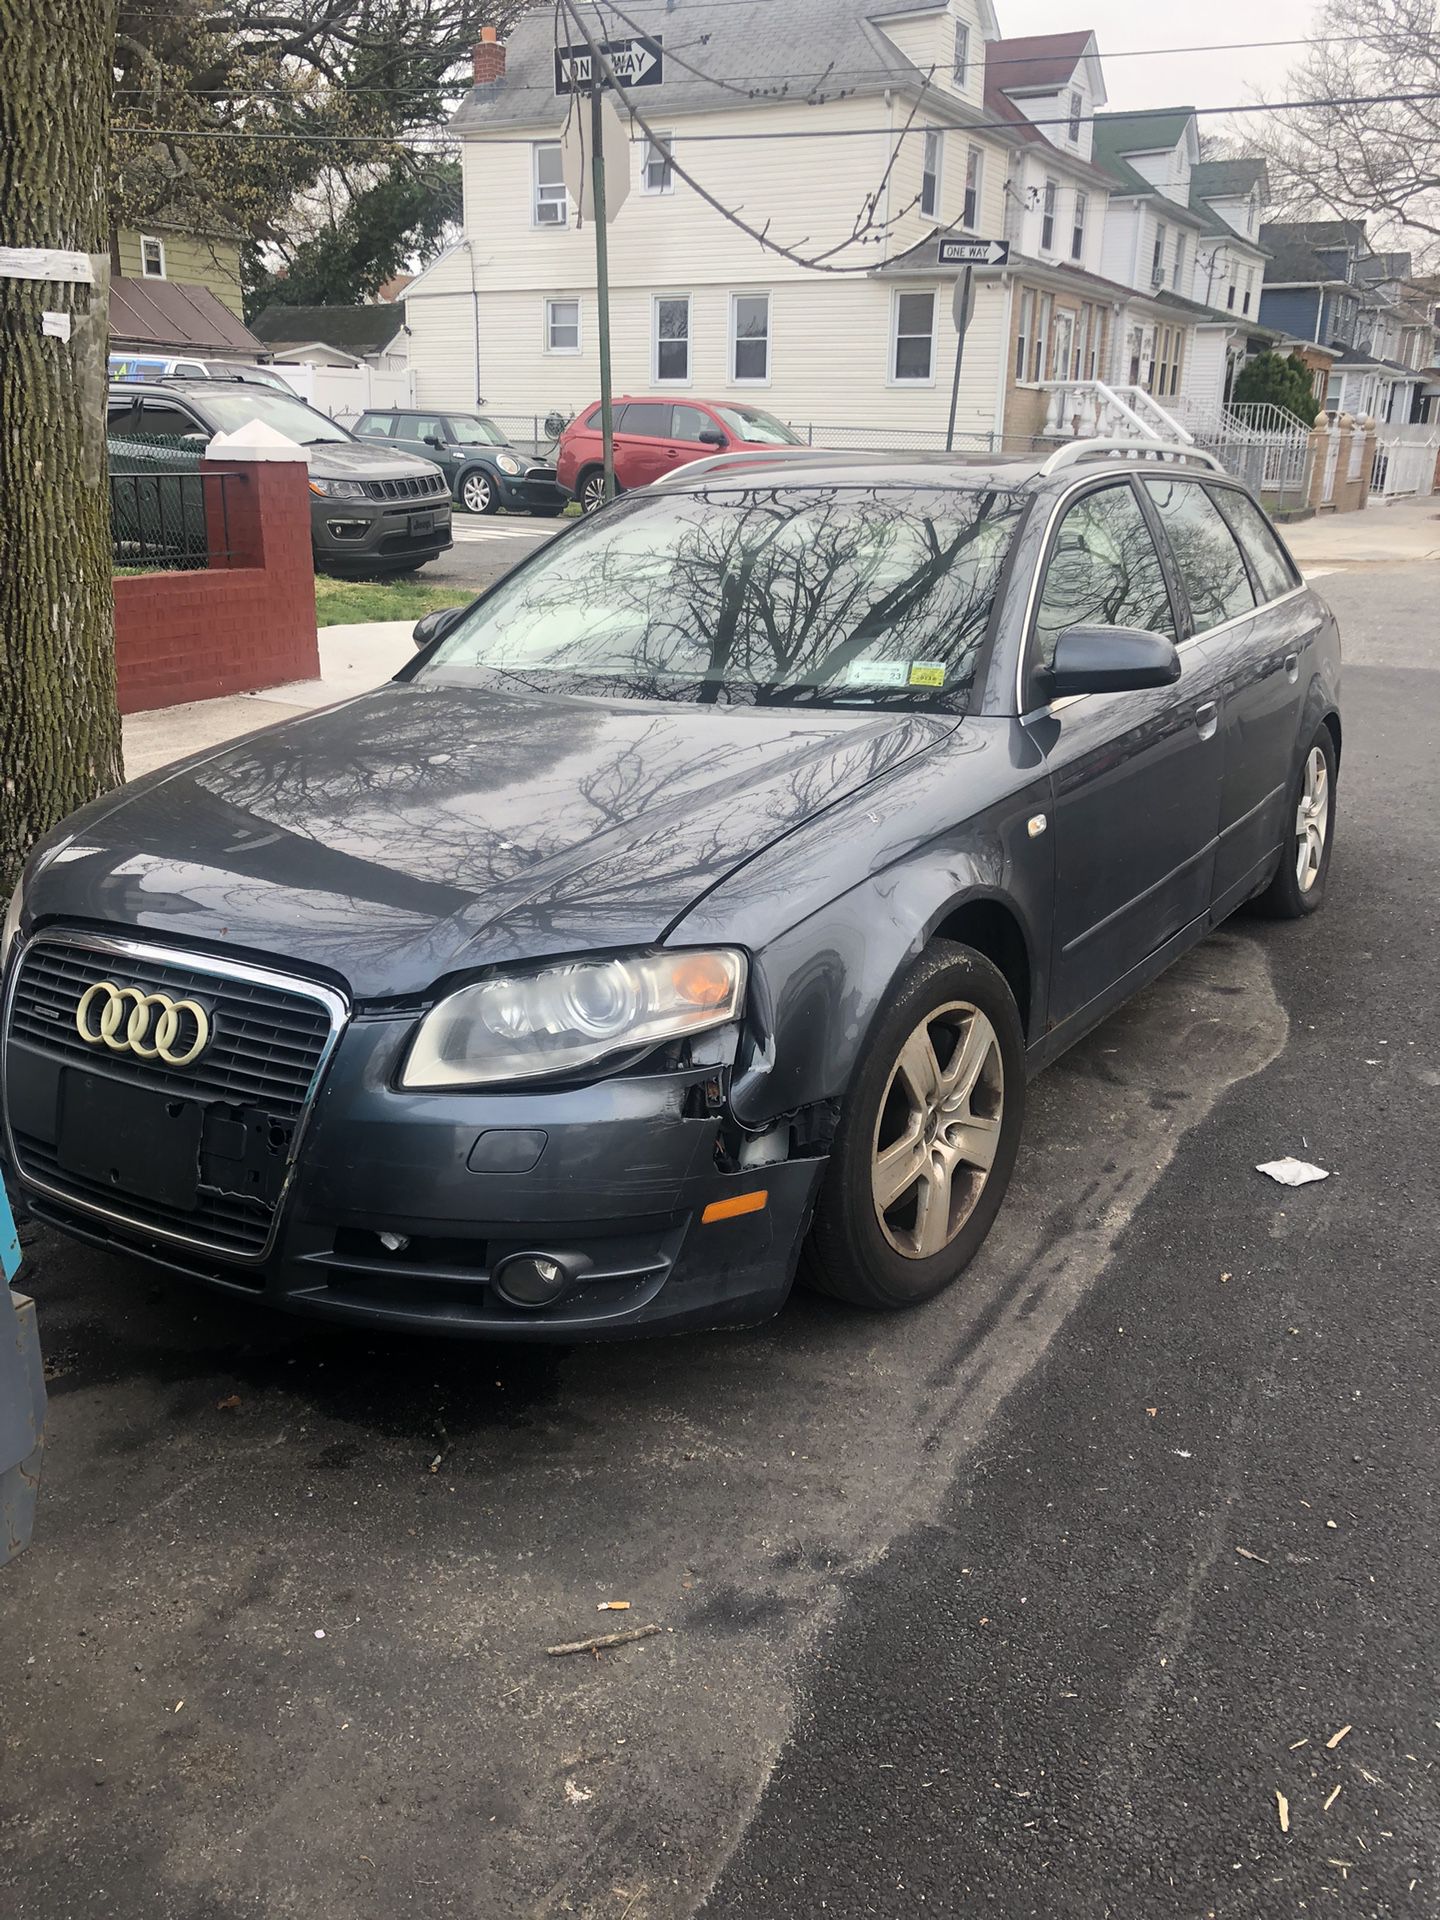 2005 Audi A4 (Parts Or Whole)